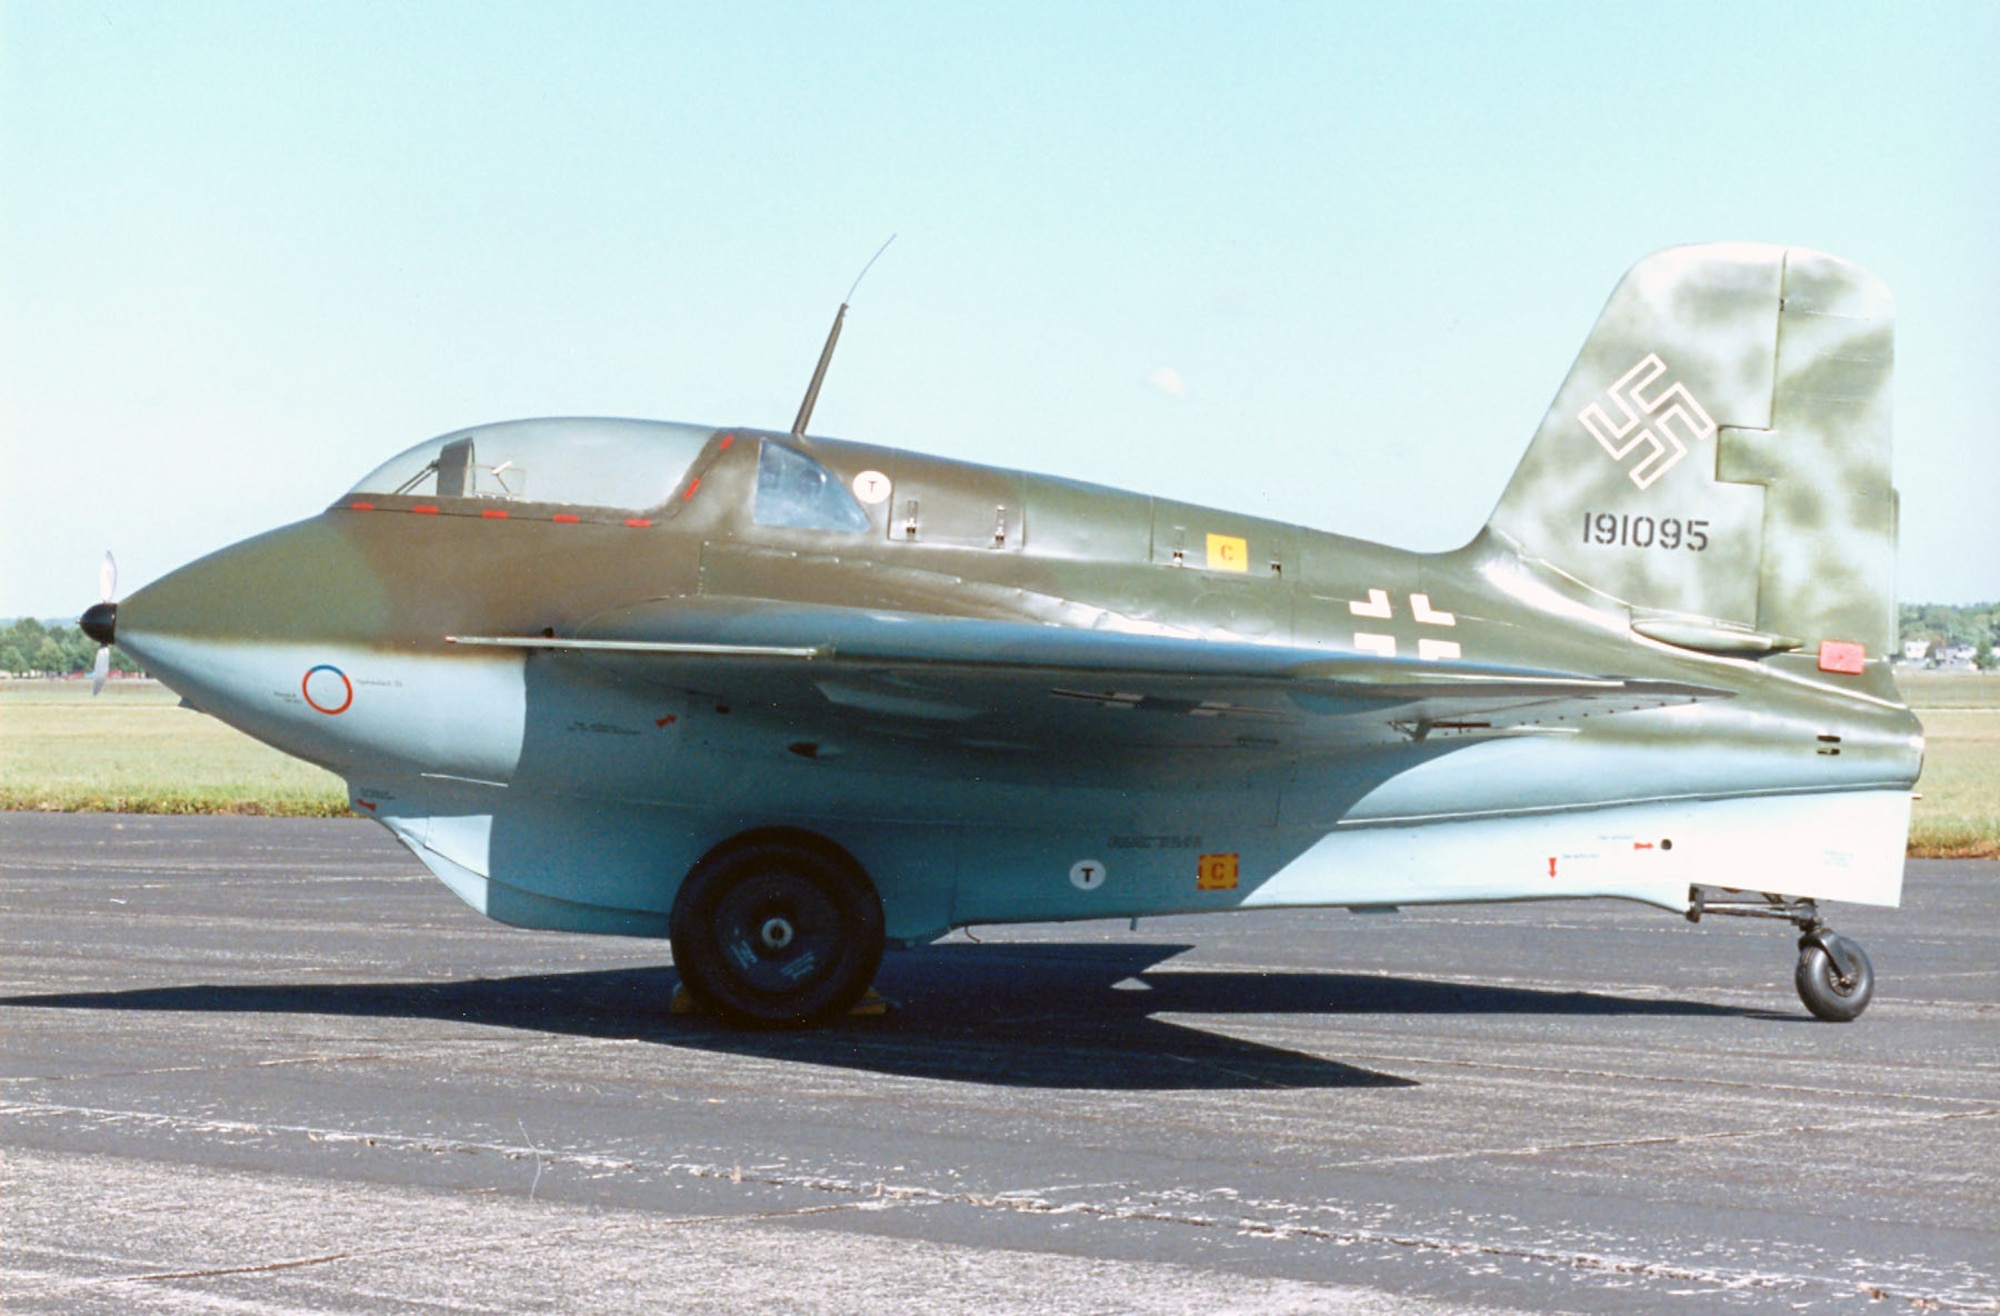 DAYTON, Ohio -- Messerschmitt Me 163B at the National Museum of the United States Air Force. (U.S. Air Force photo)